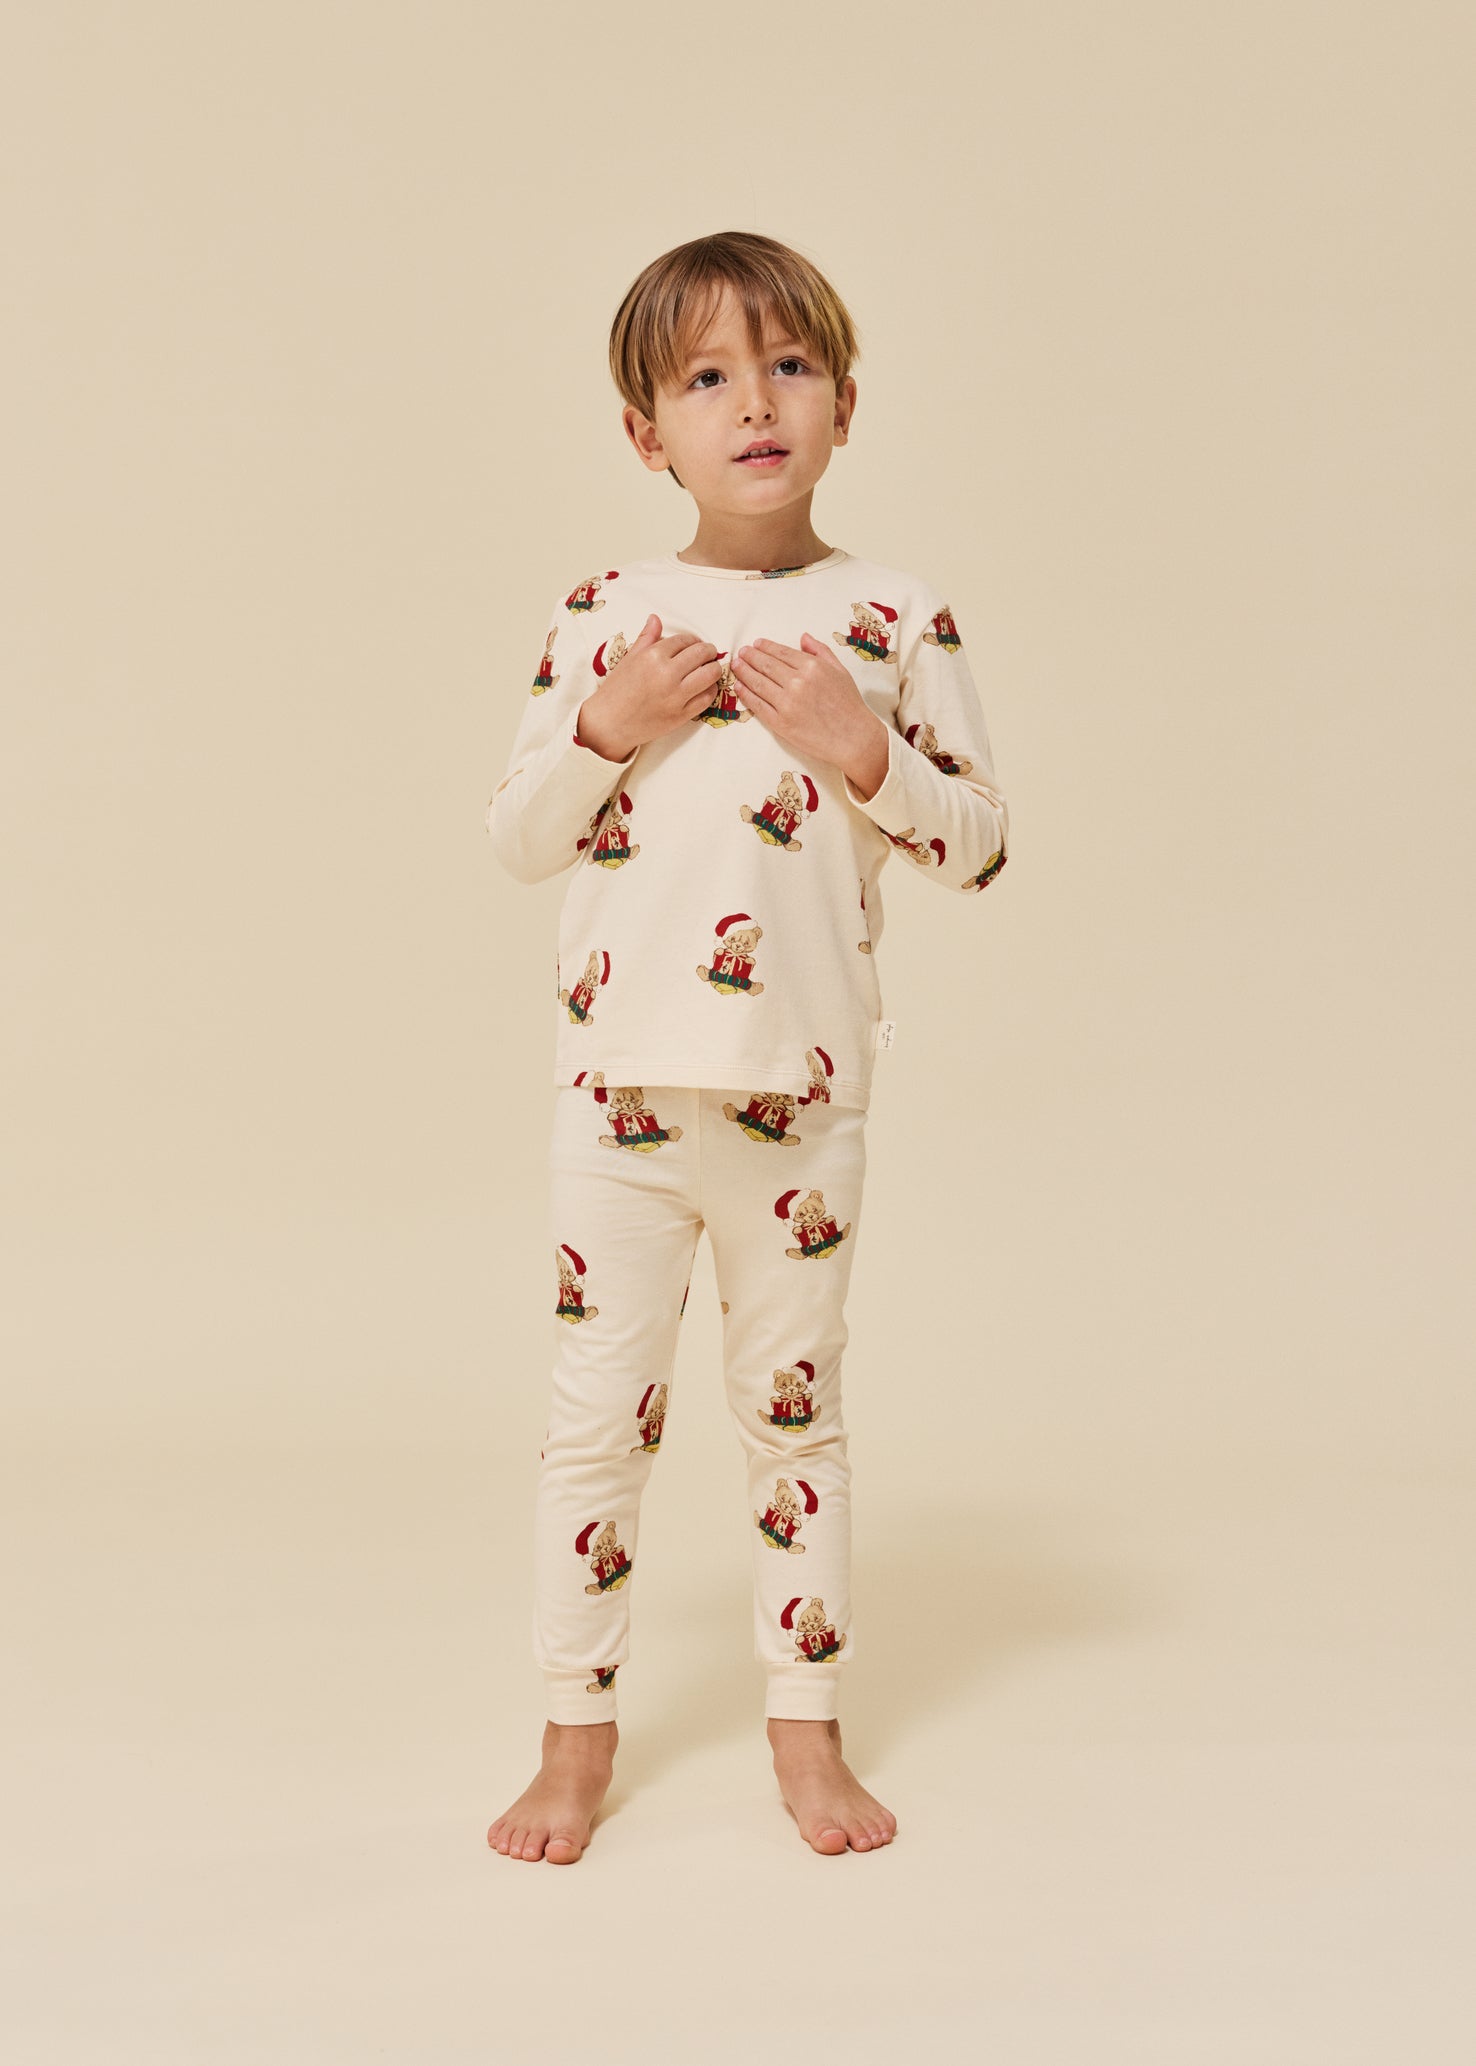 Weihnachtsset 'Christmas Teddy' - The Little One • Family.Concept.Store. 